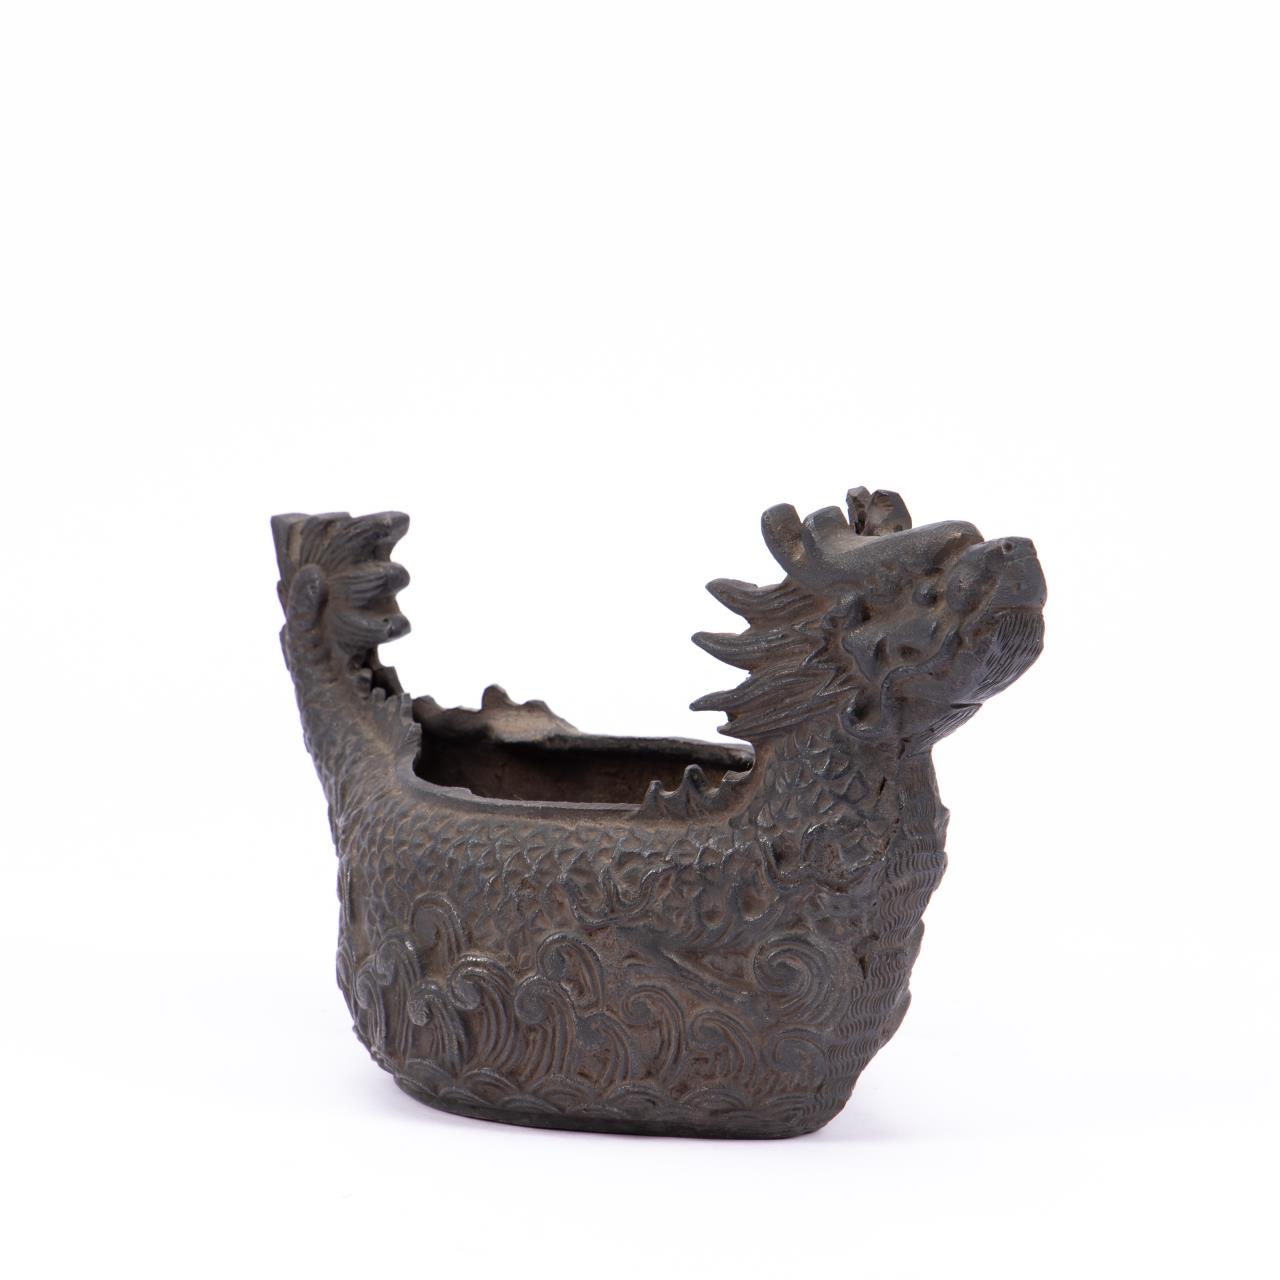 CHINESE ARCHAIC STYLE BRONZE DRAGON 35d81a